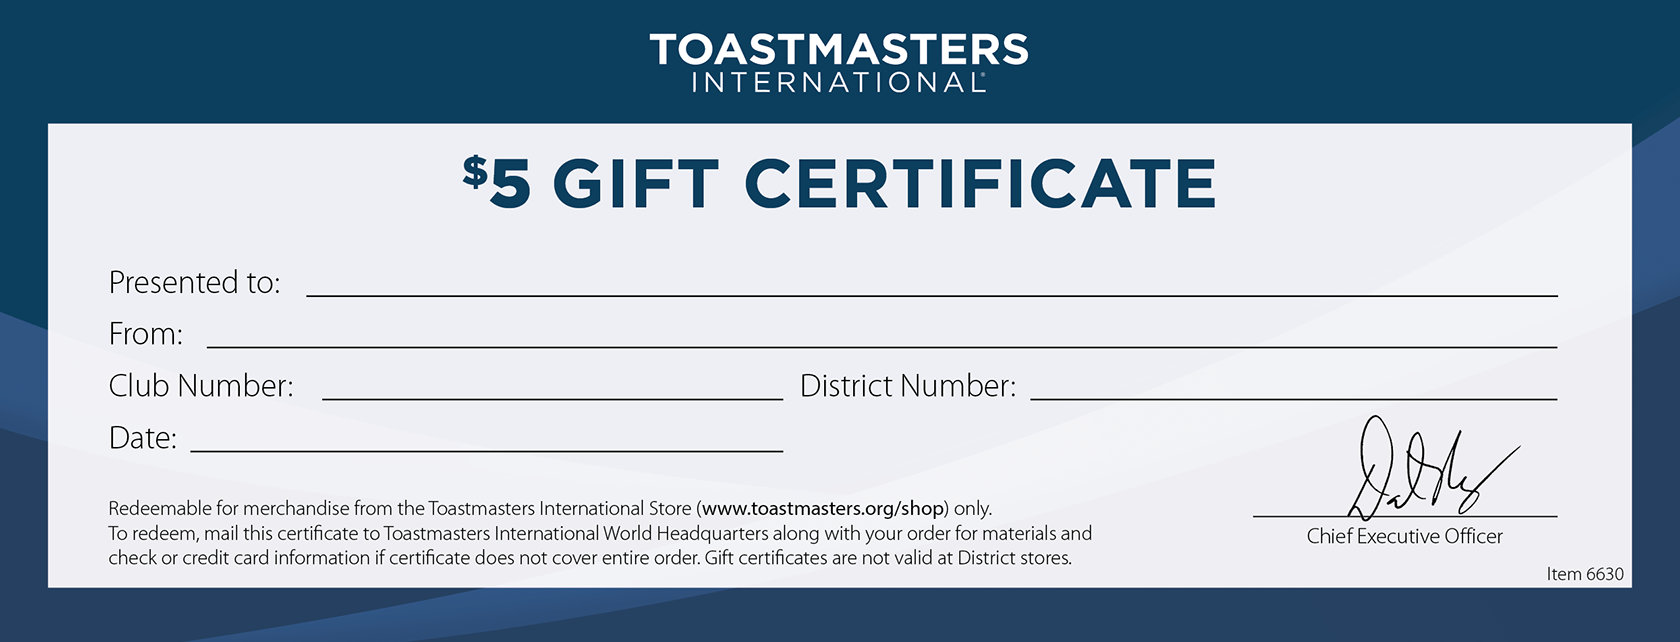 $5-Gift-Certificate-Toastmasters